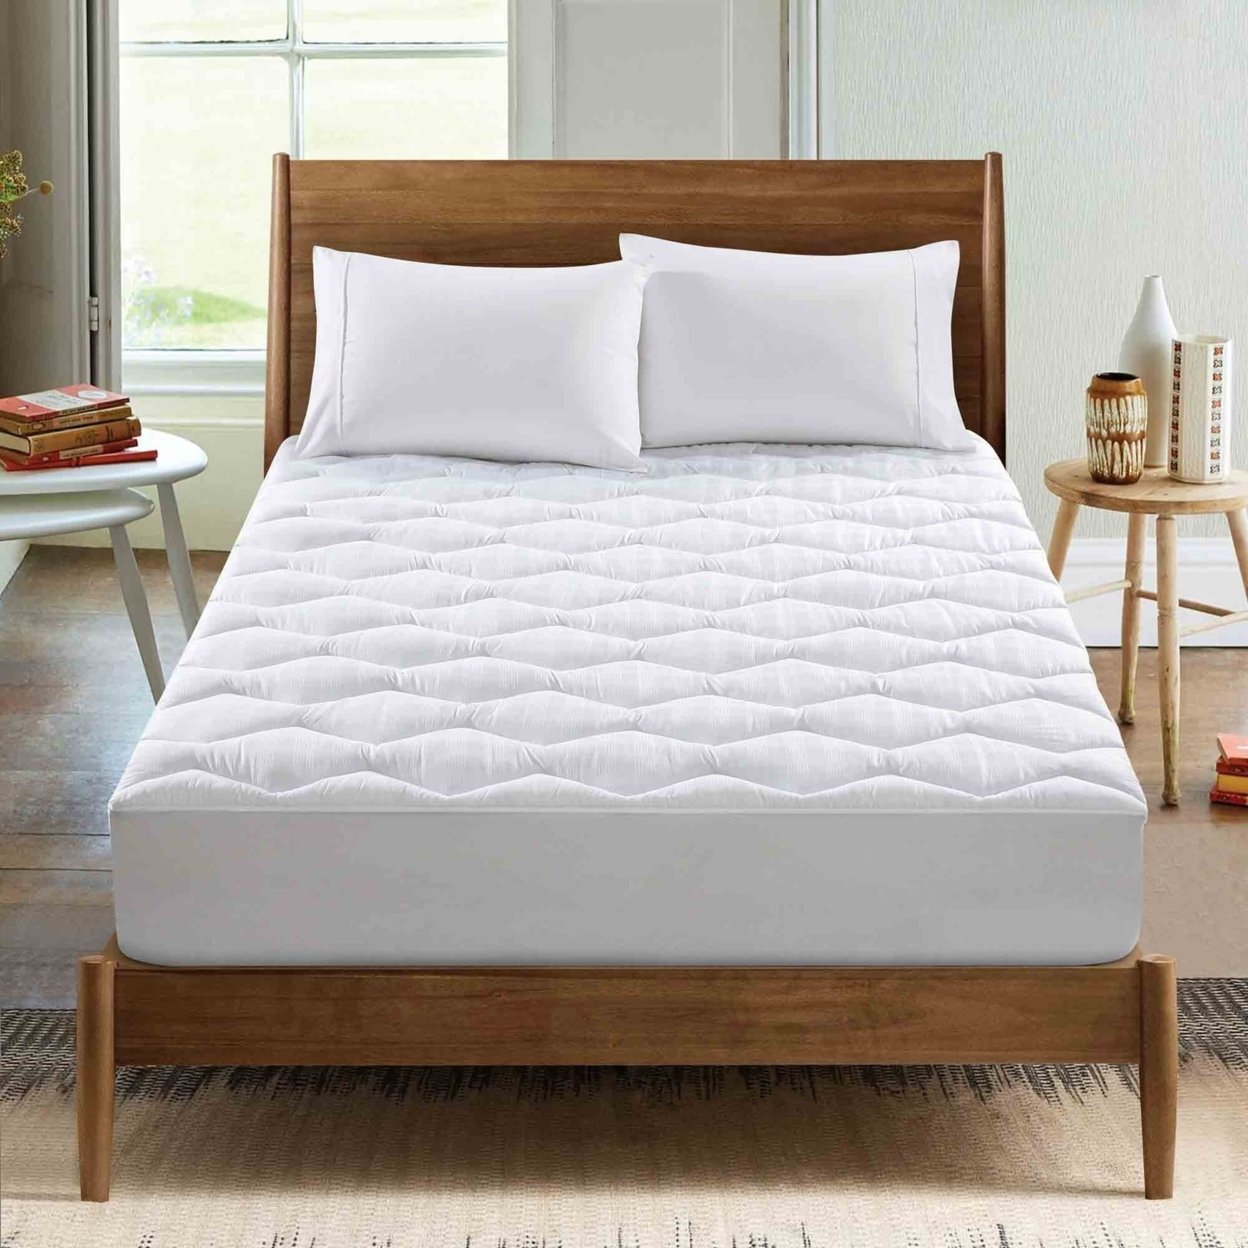 Down Alternative Mattress Pad With 500 Thread Count Cotton Cover, 18 Inch Deep, Soft And Breathable Bedding - Twin, White